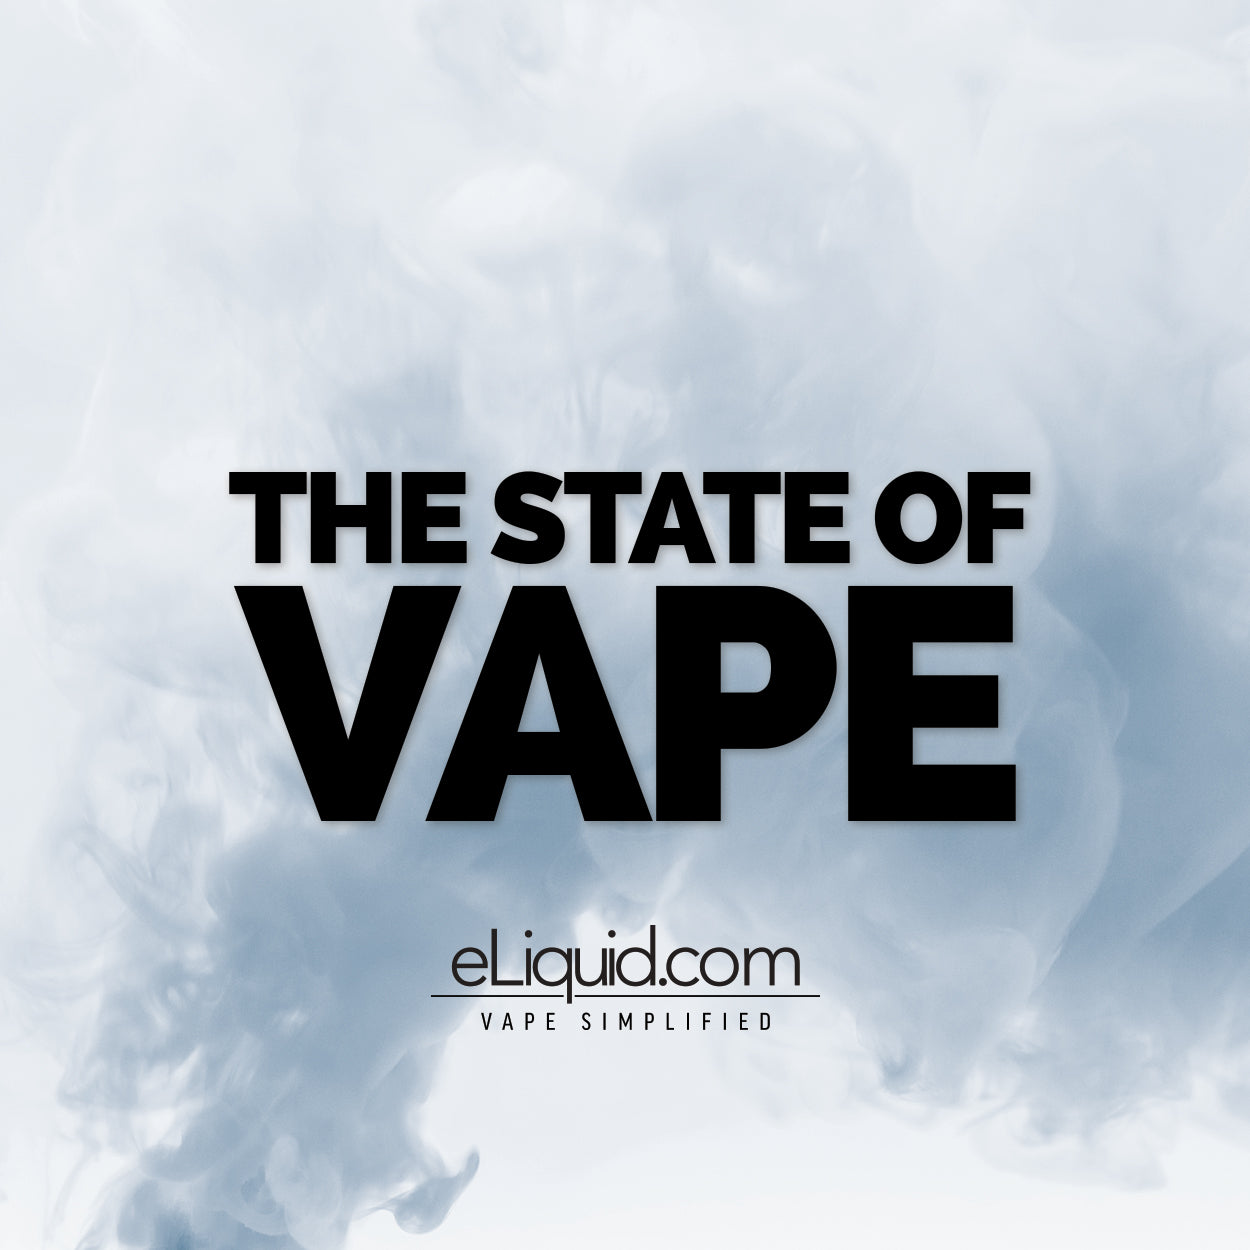 The State of Vape